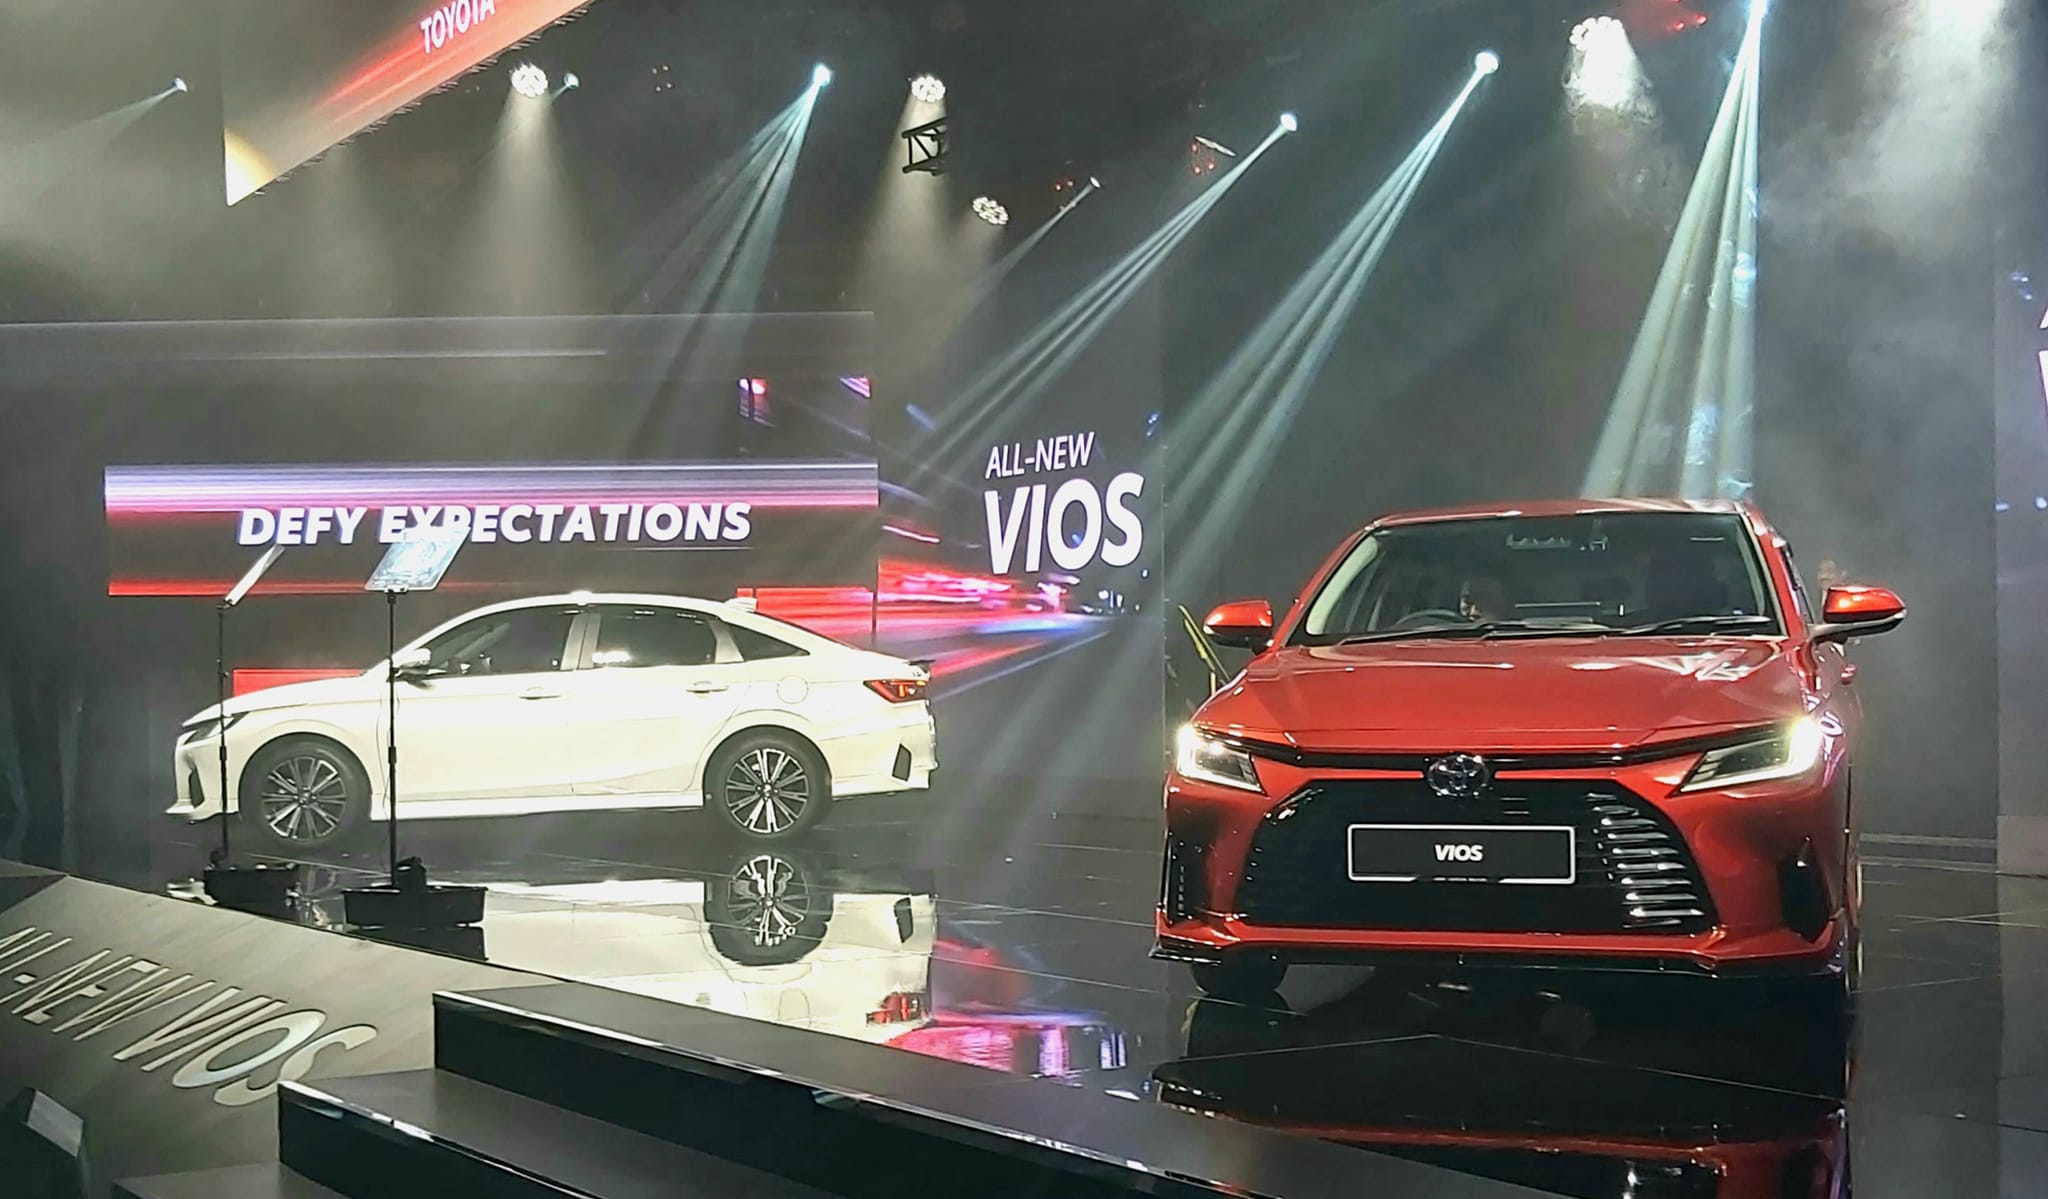 all-new 4th generation toyota vios launched in malaysia, priced from rm89,600